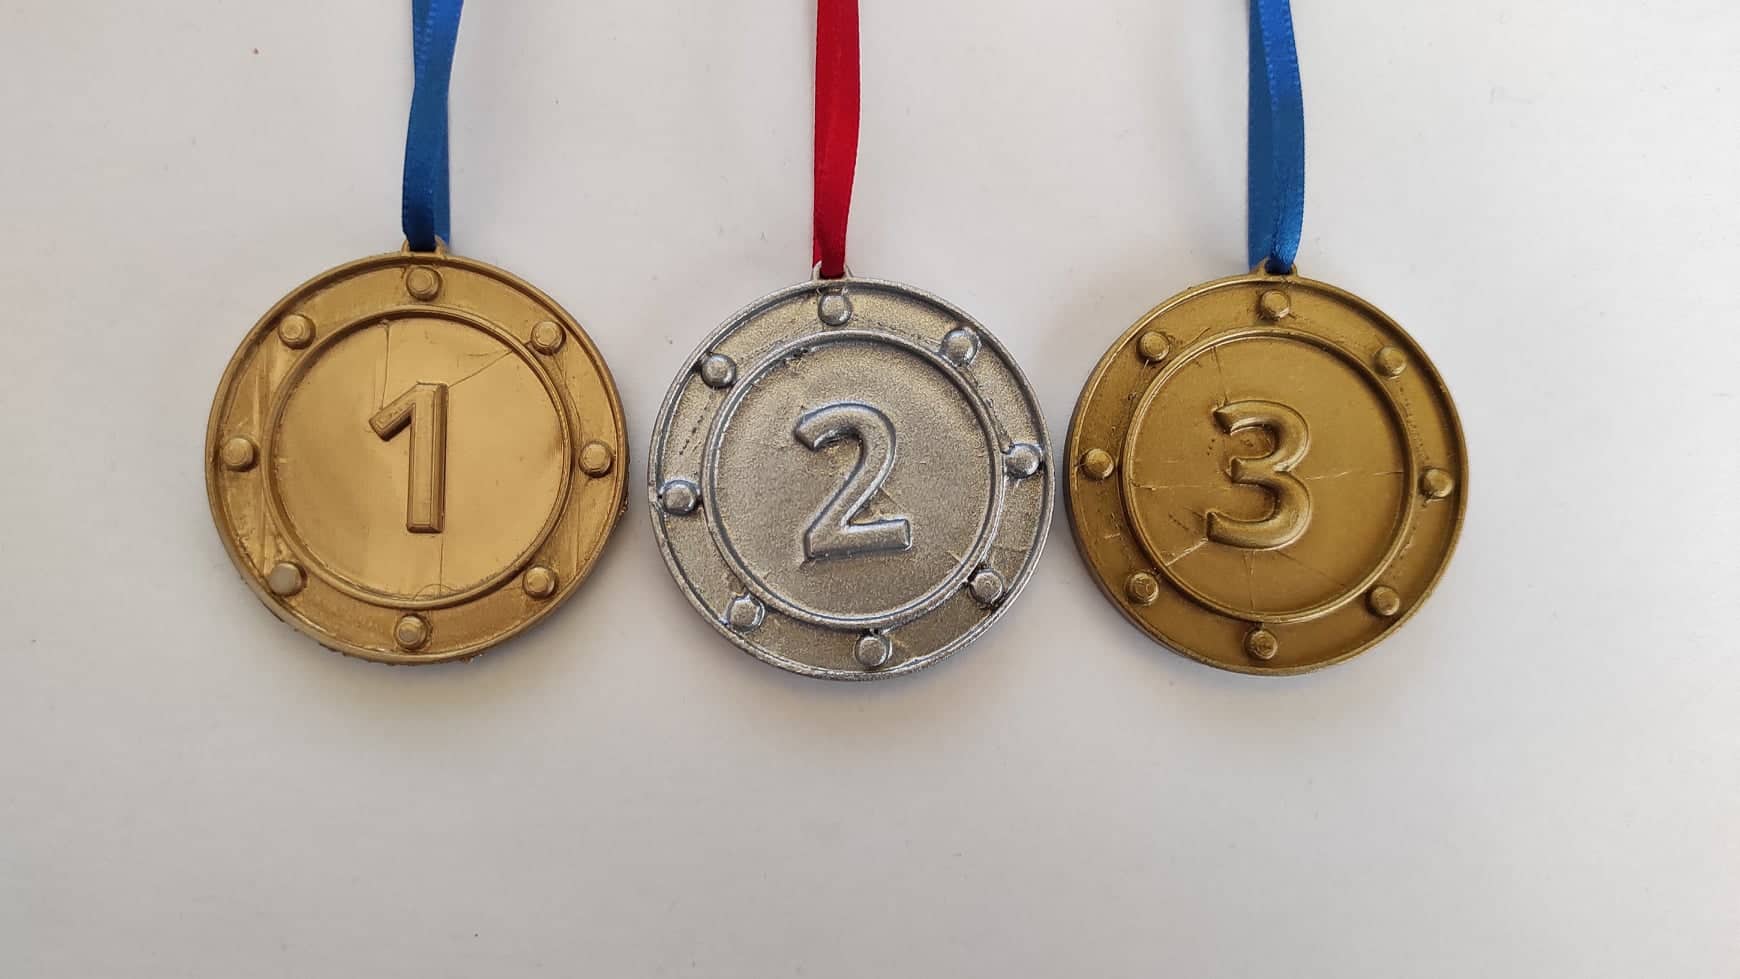 Medals for any game